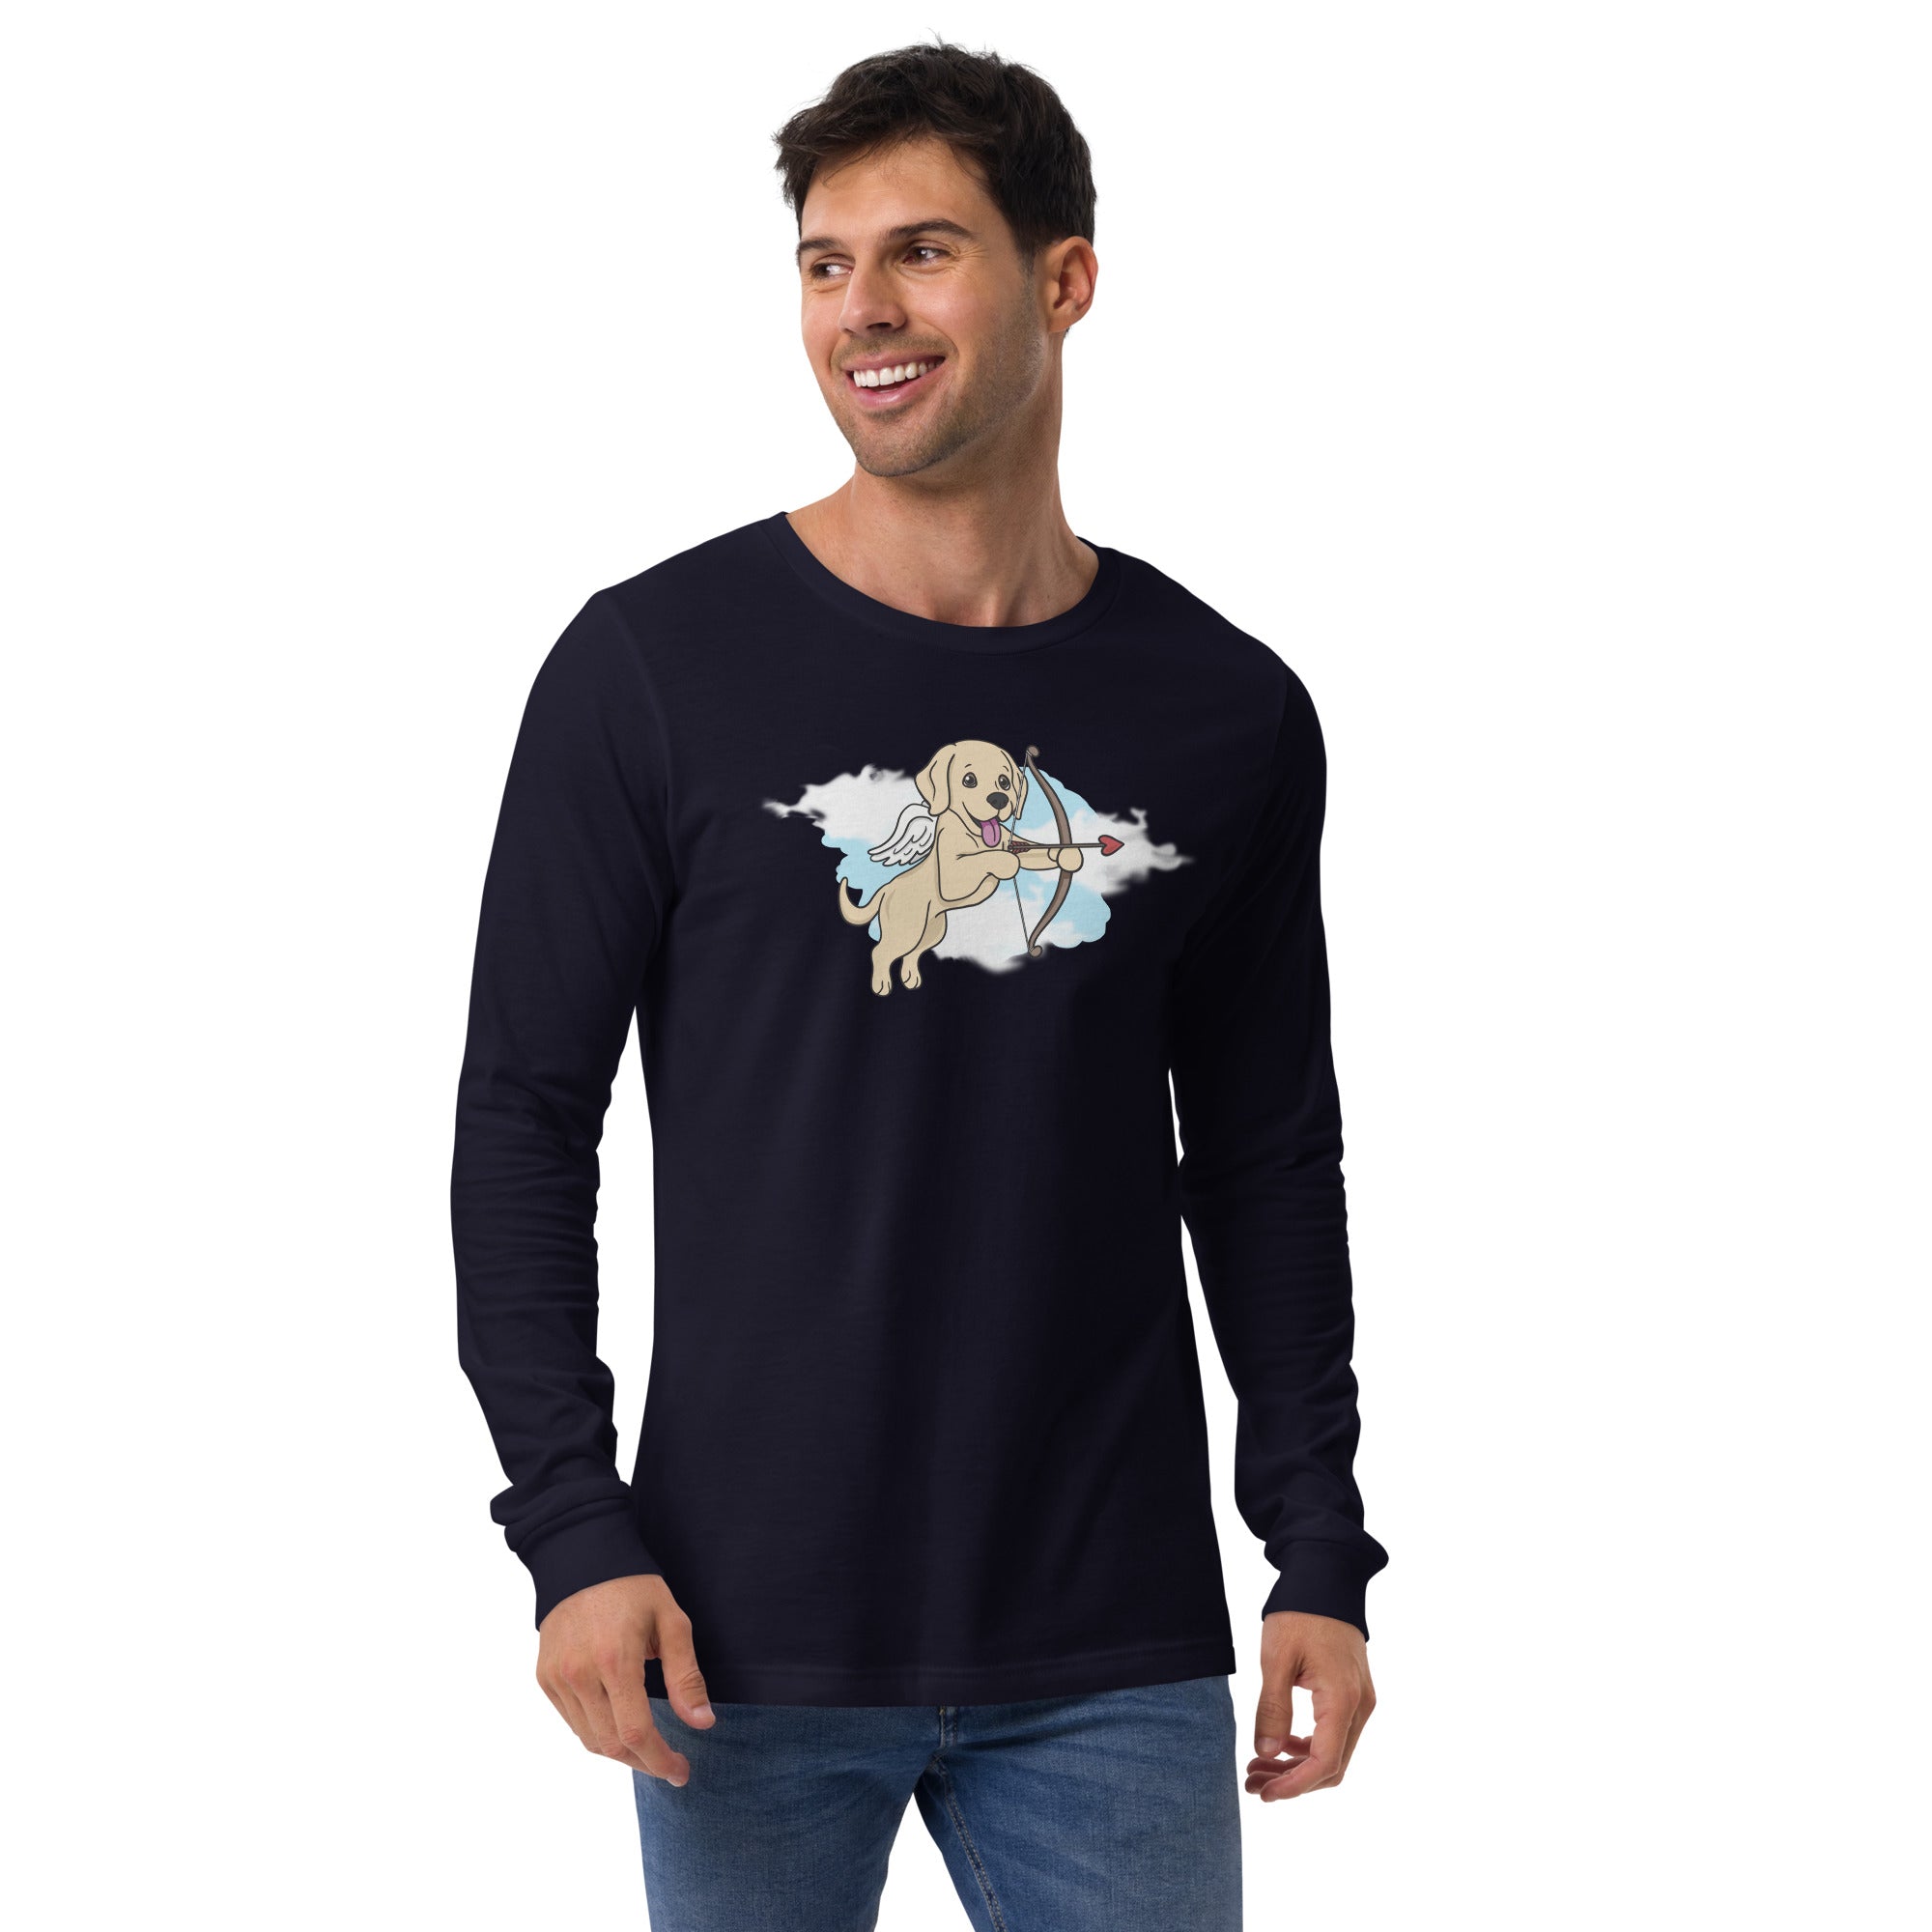 Cupup Long Sleeve Tee - TAILWAGS UNLIMITED